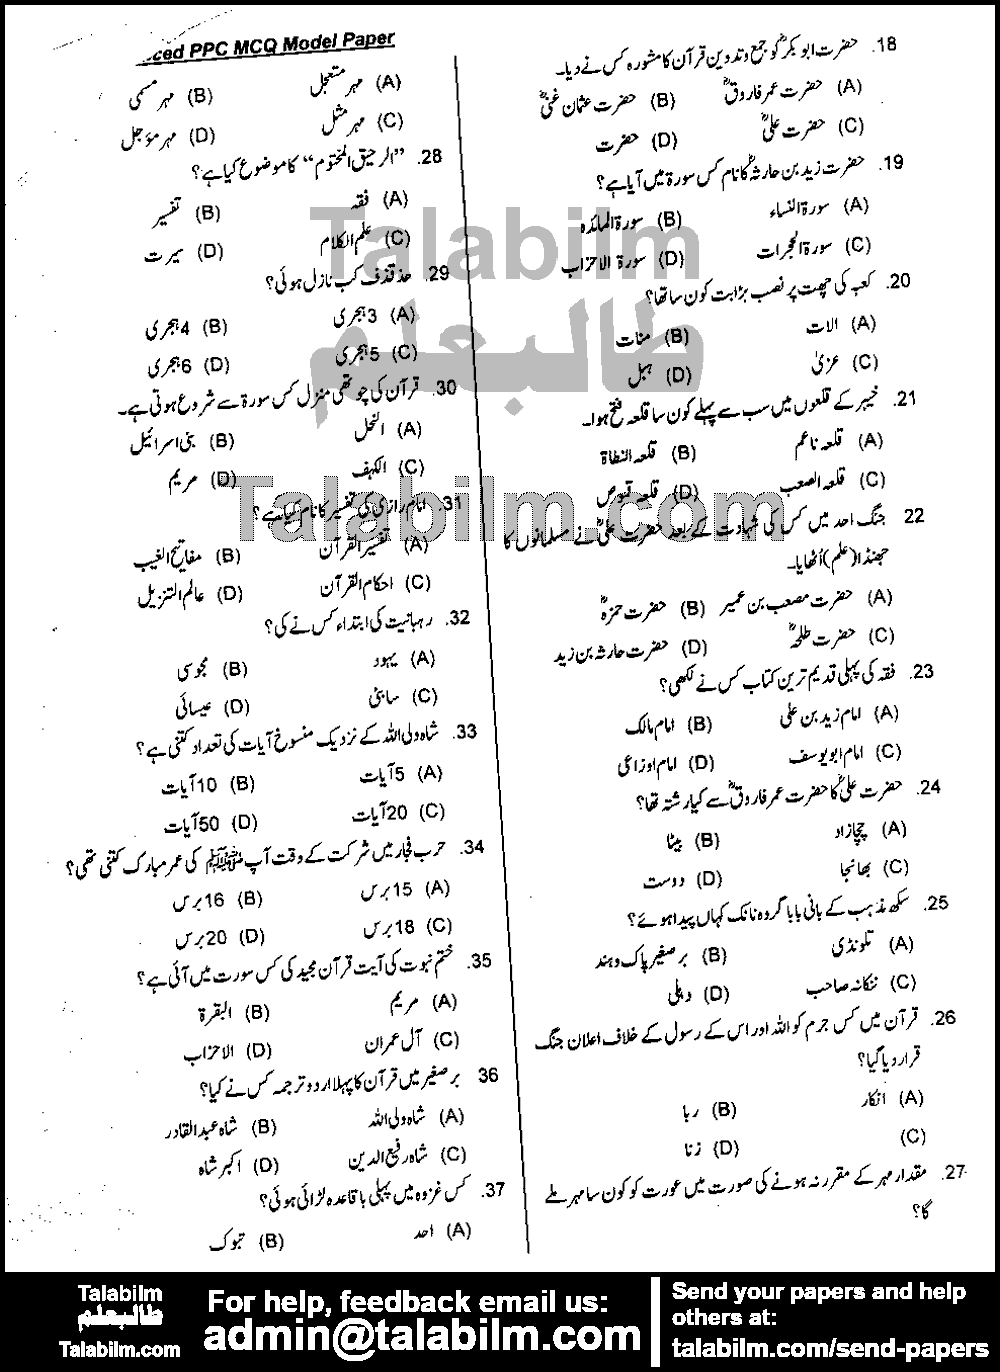 Islamiat Lecturer 0 past paper for 2017 Page No. 2